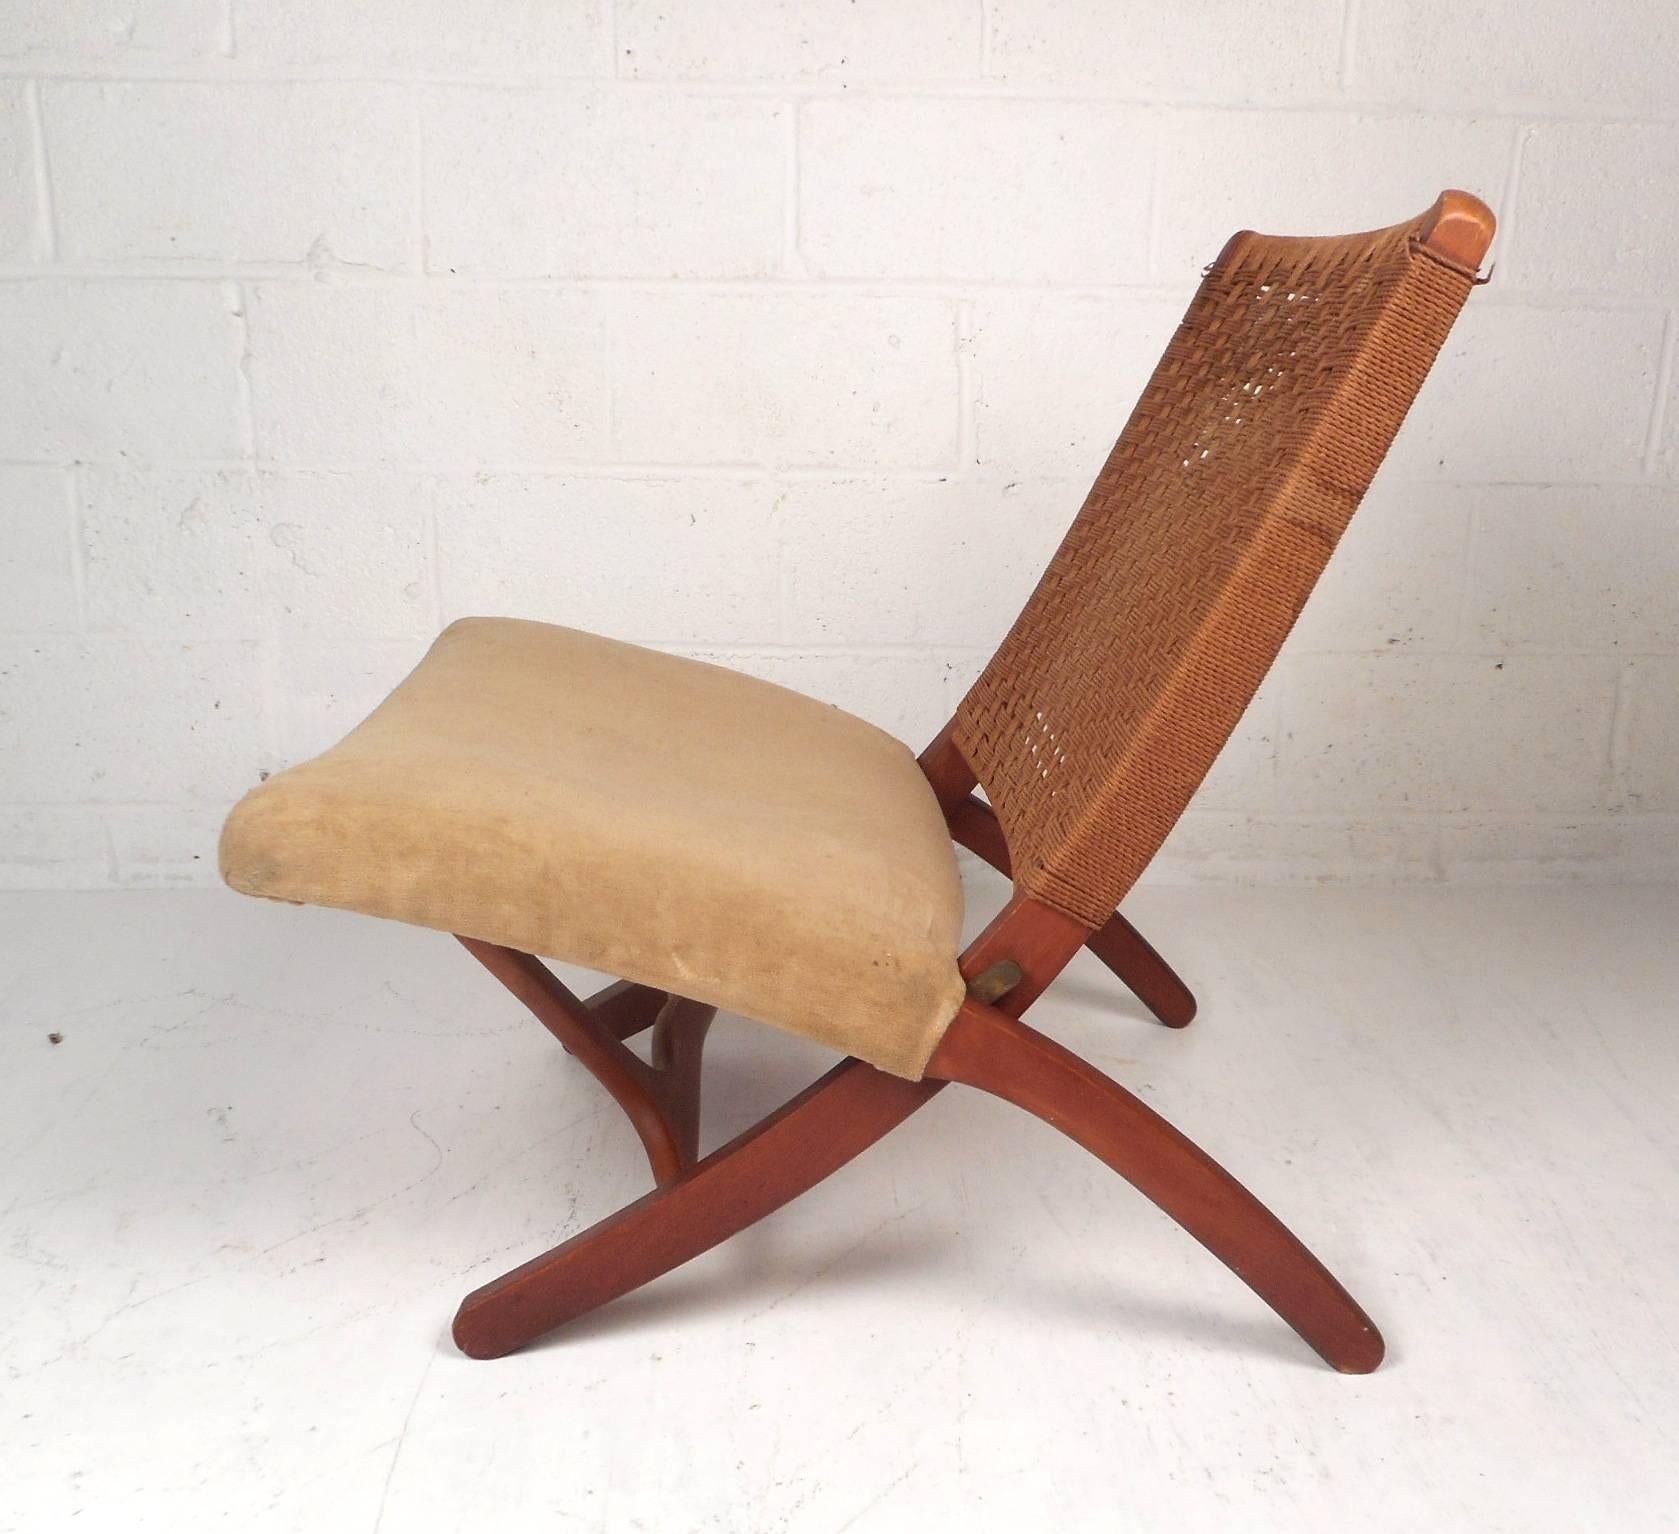 This stunning vintage modern Hans Wegner style lounge chair features a rope backrest with an upholstered seat covered in extremely soft fabric. Unique design with X-shaped sides and the convenient ability to fold up for convenience. This stylish and